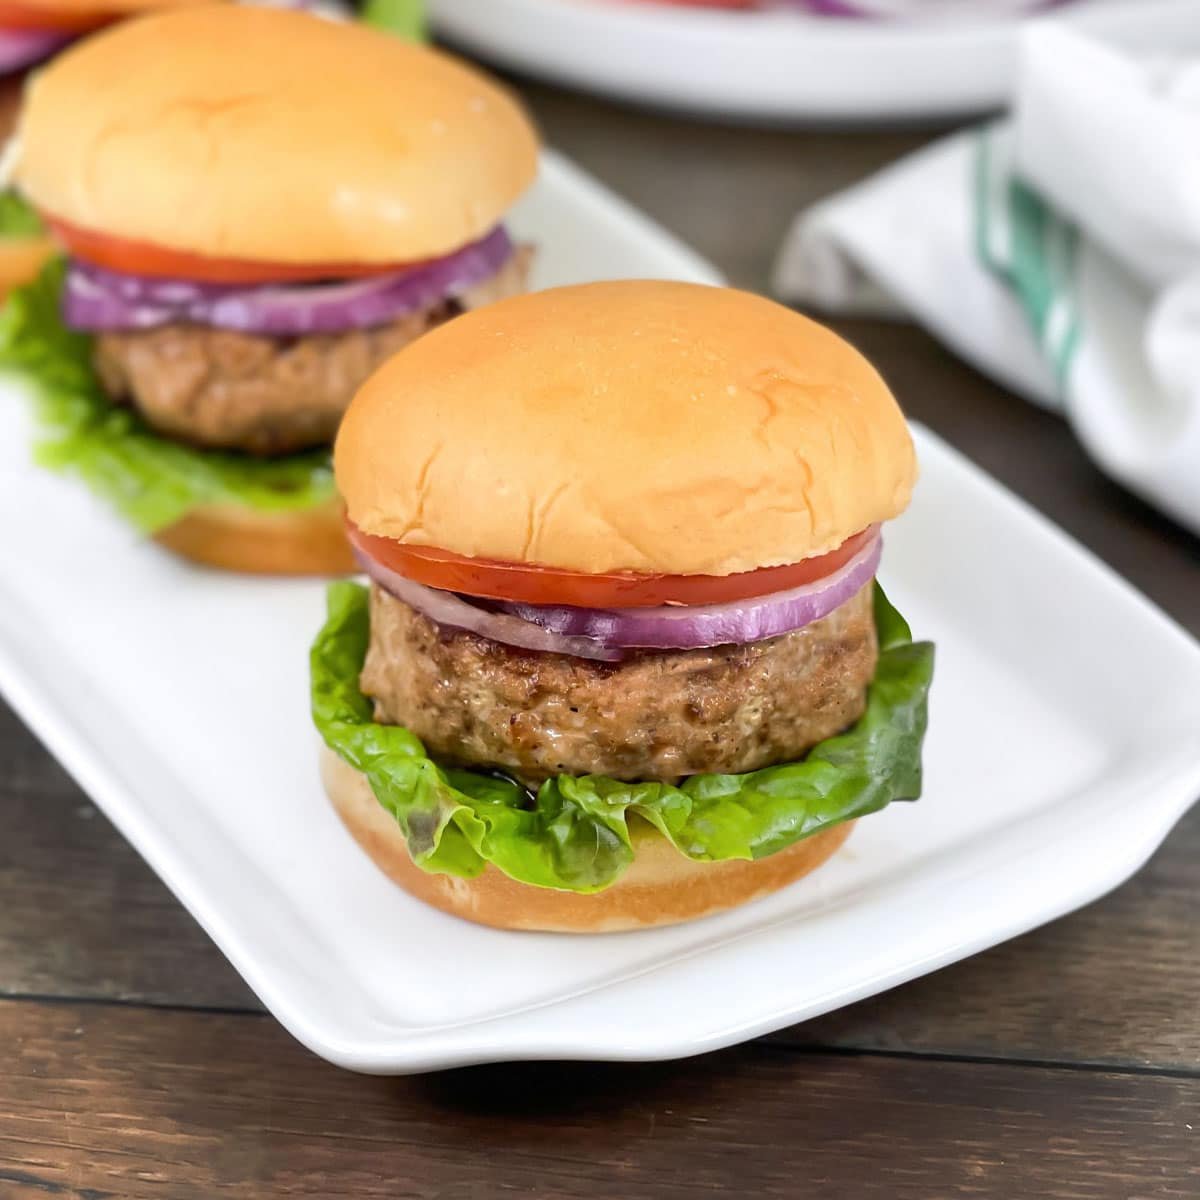 Chicken burgers with lettuce, red onion, and tomato on a rectangular white platter.